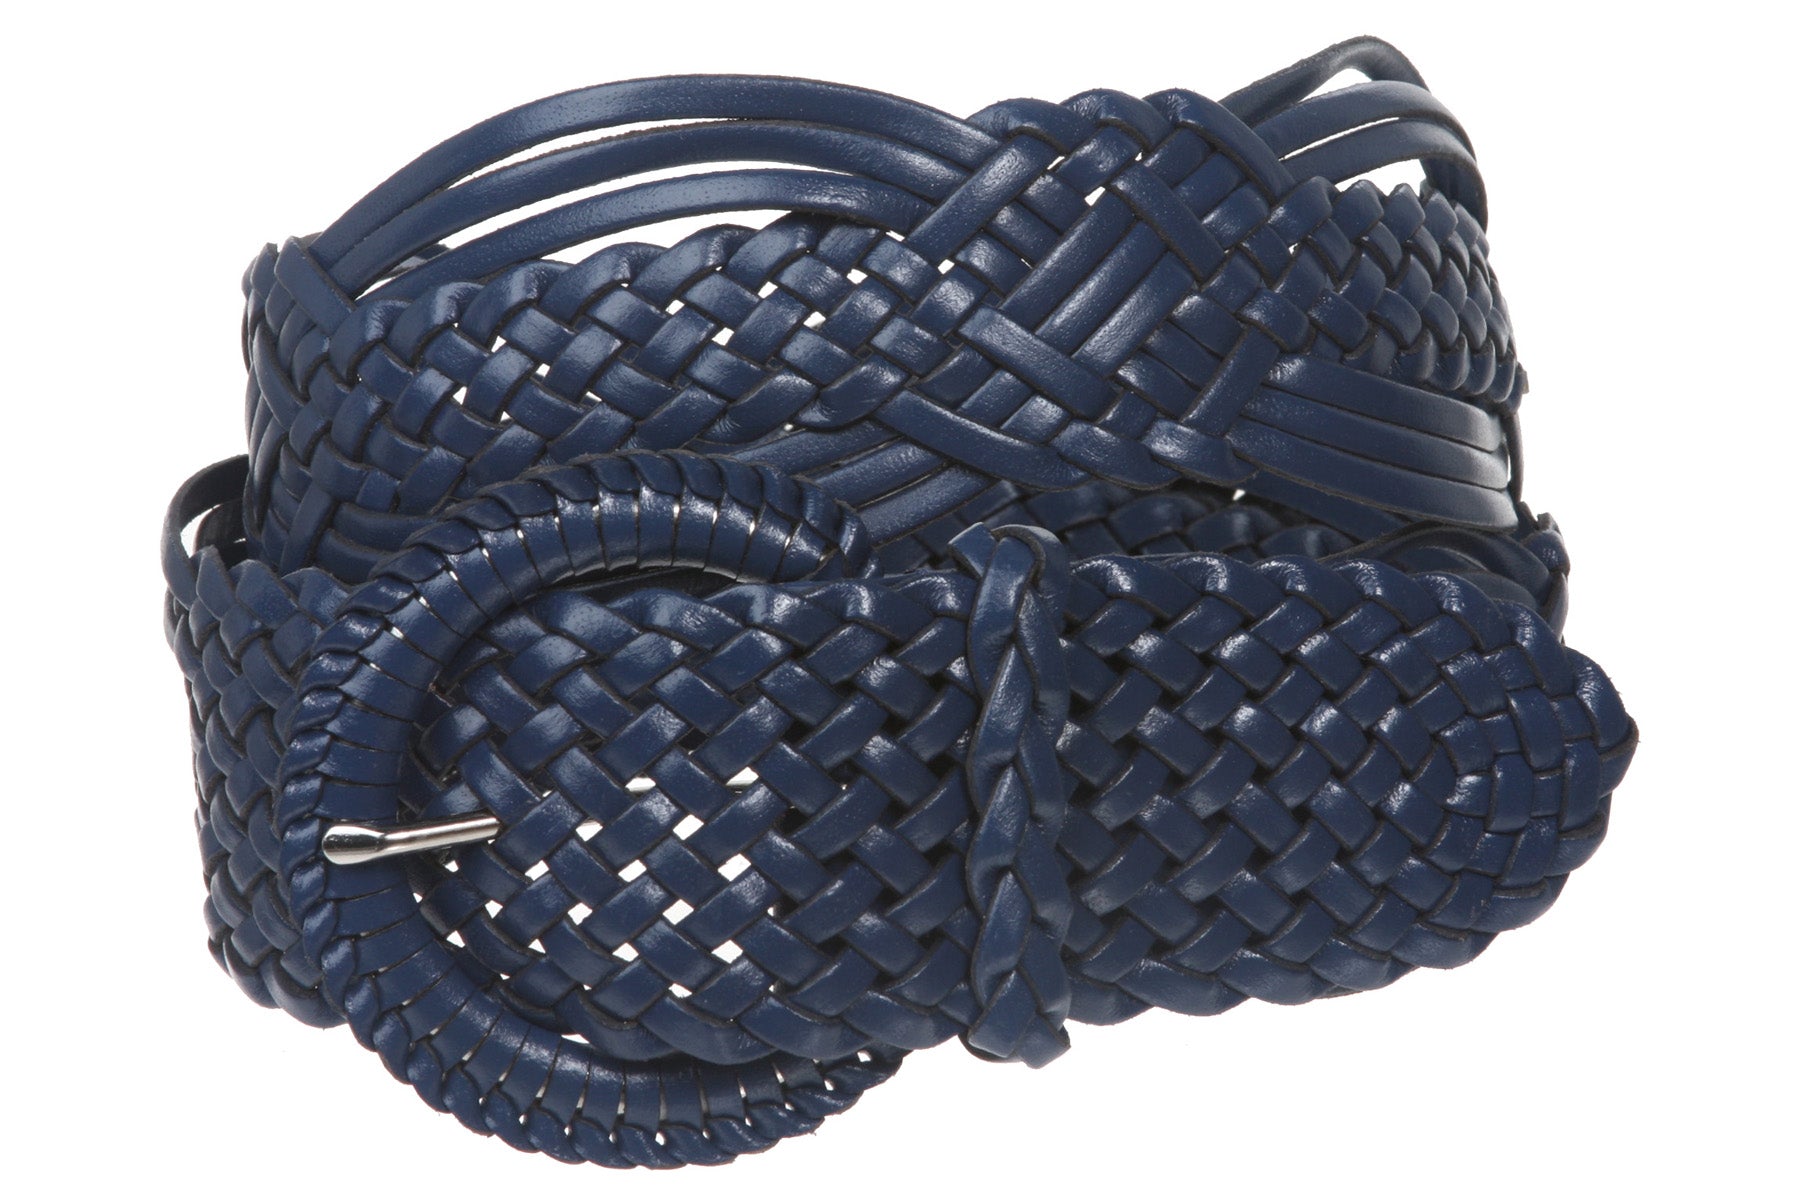 2" (50 mm) Genuine Leather Braided Woven Belt